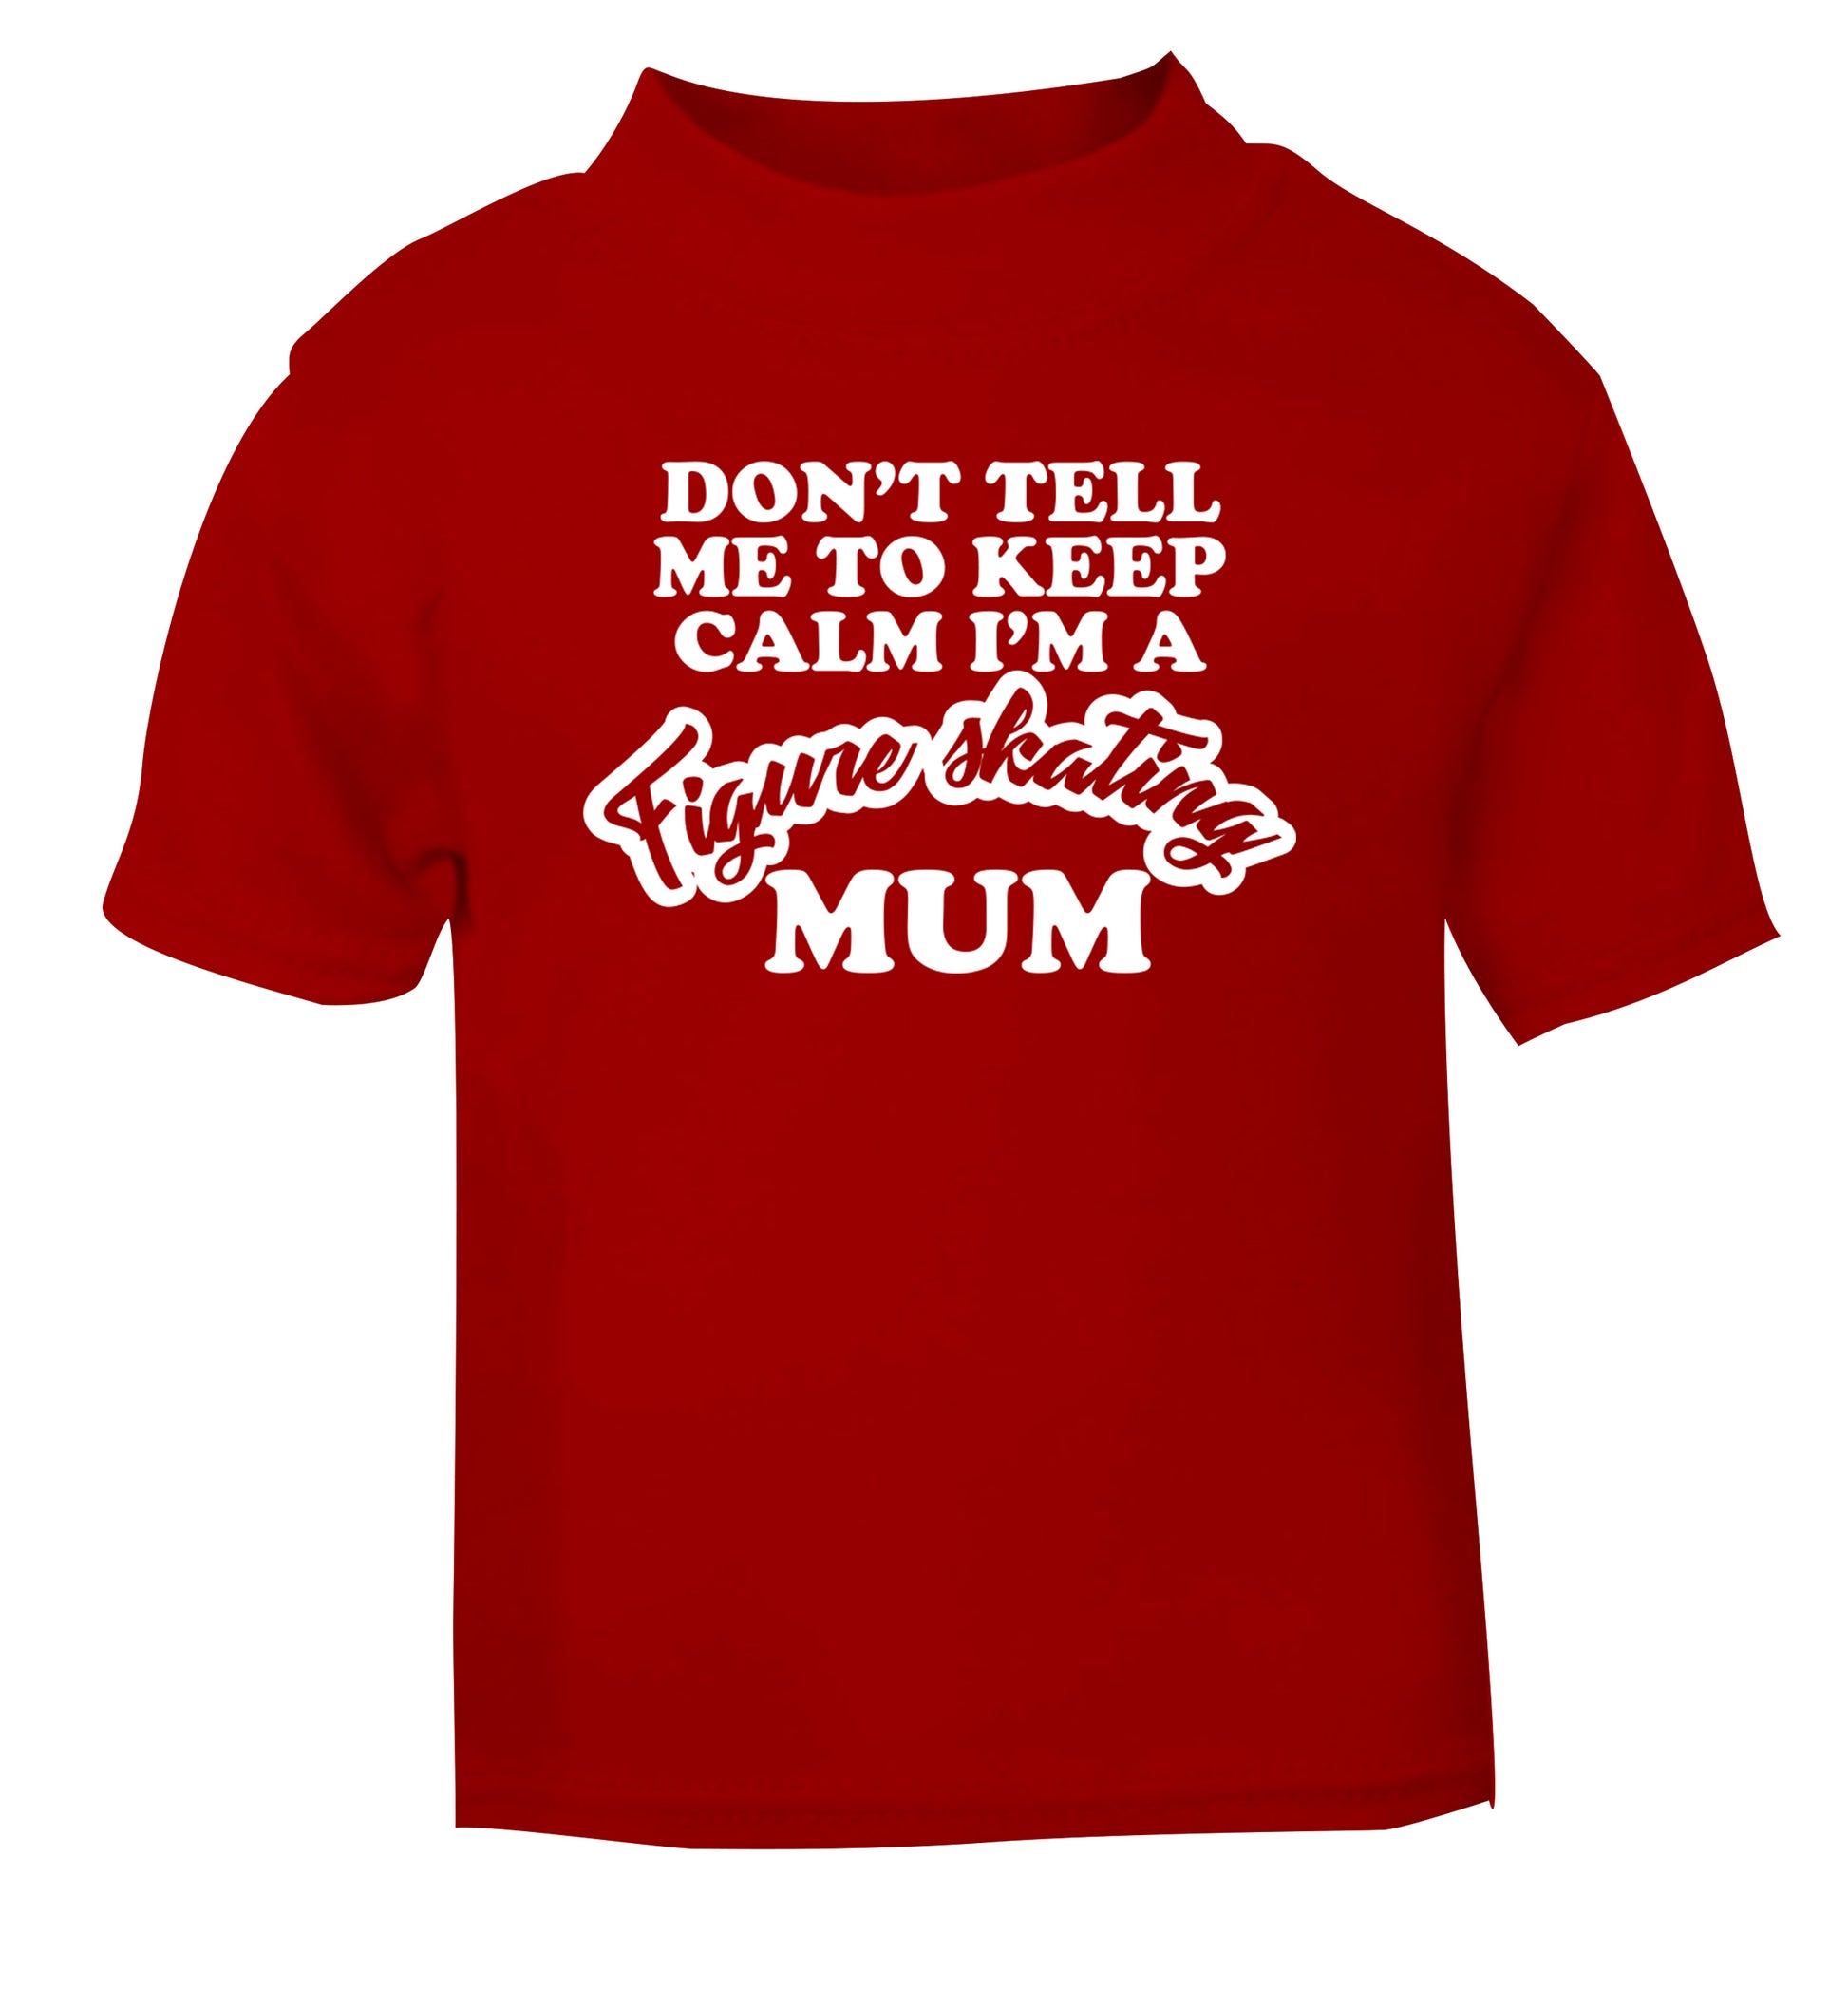 Don't tell me to keep calm I'm a figure skating mum red Baby Toddler Tshirt 2 Years